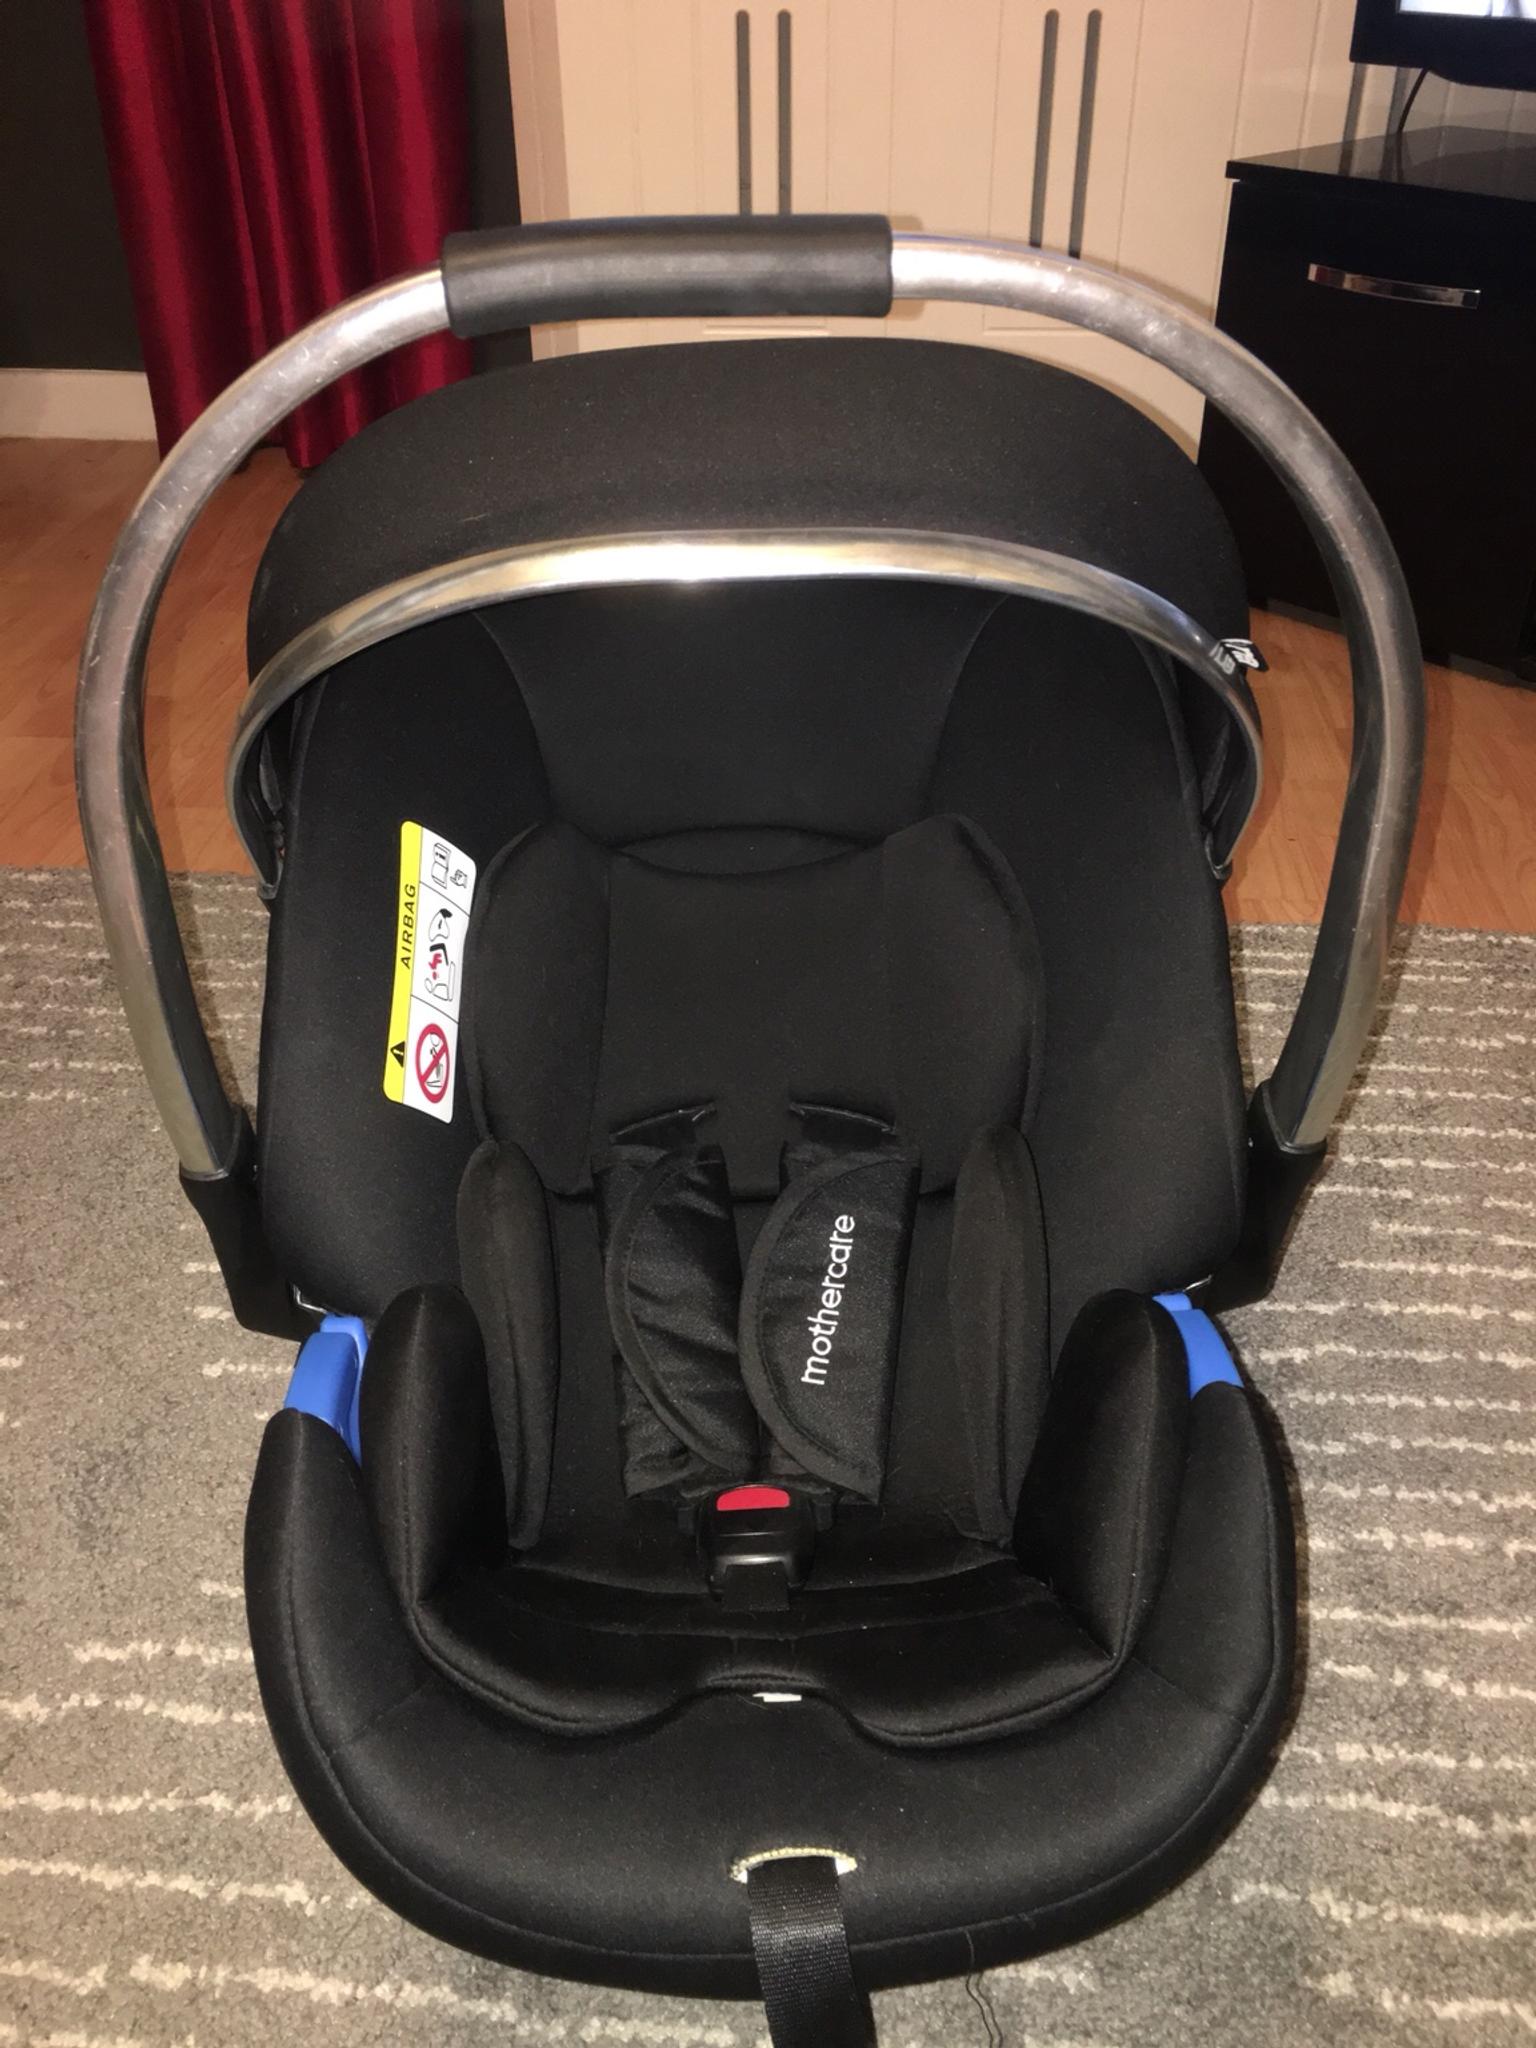 isofix base for mothercare journey